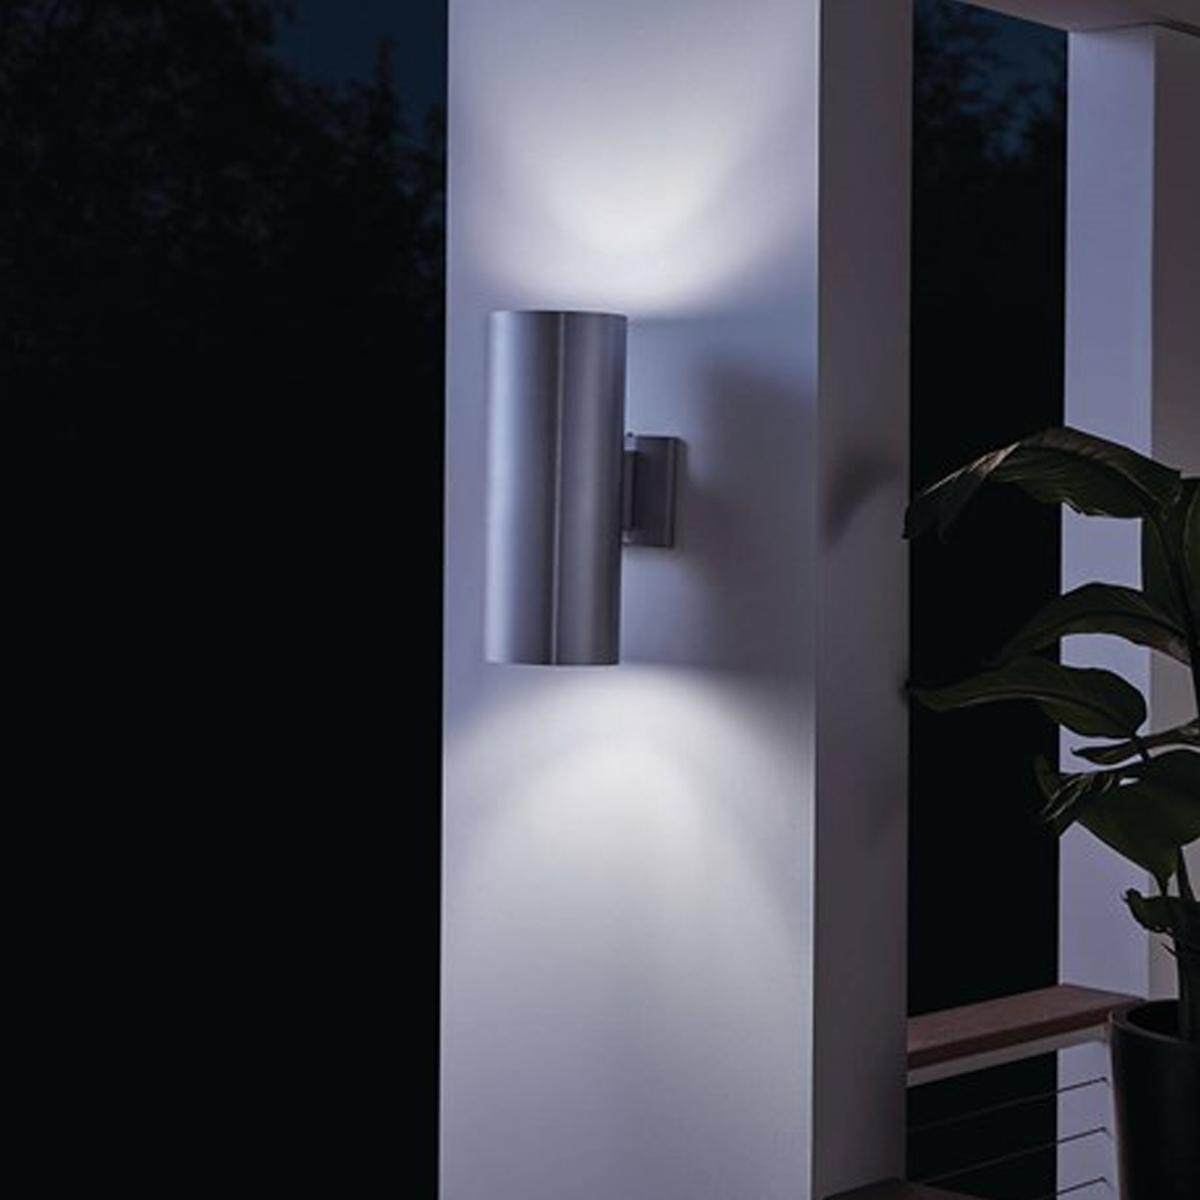 15 Inch 2 Lights Up/Down Outdoor Cylinder Sconces